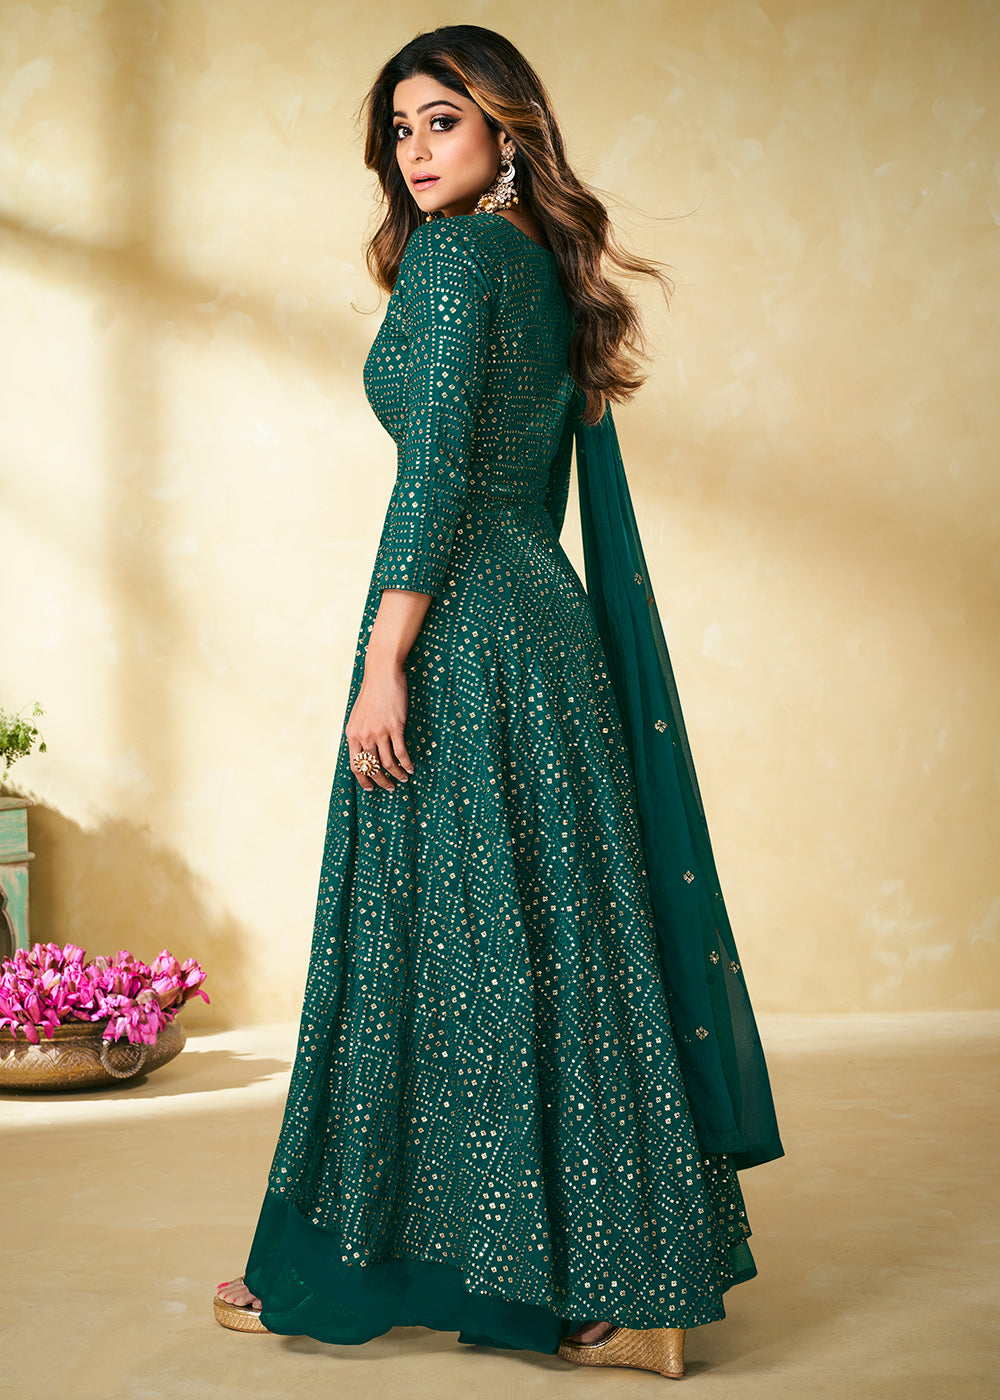 Teal Indian Designer Embroidered Palazzo Suit